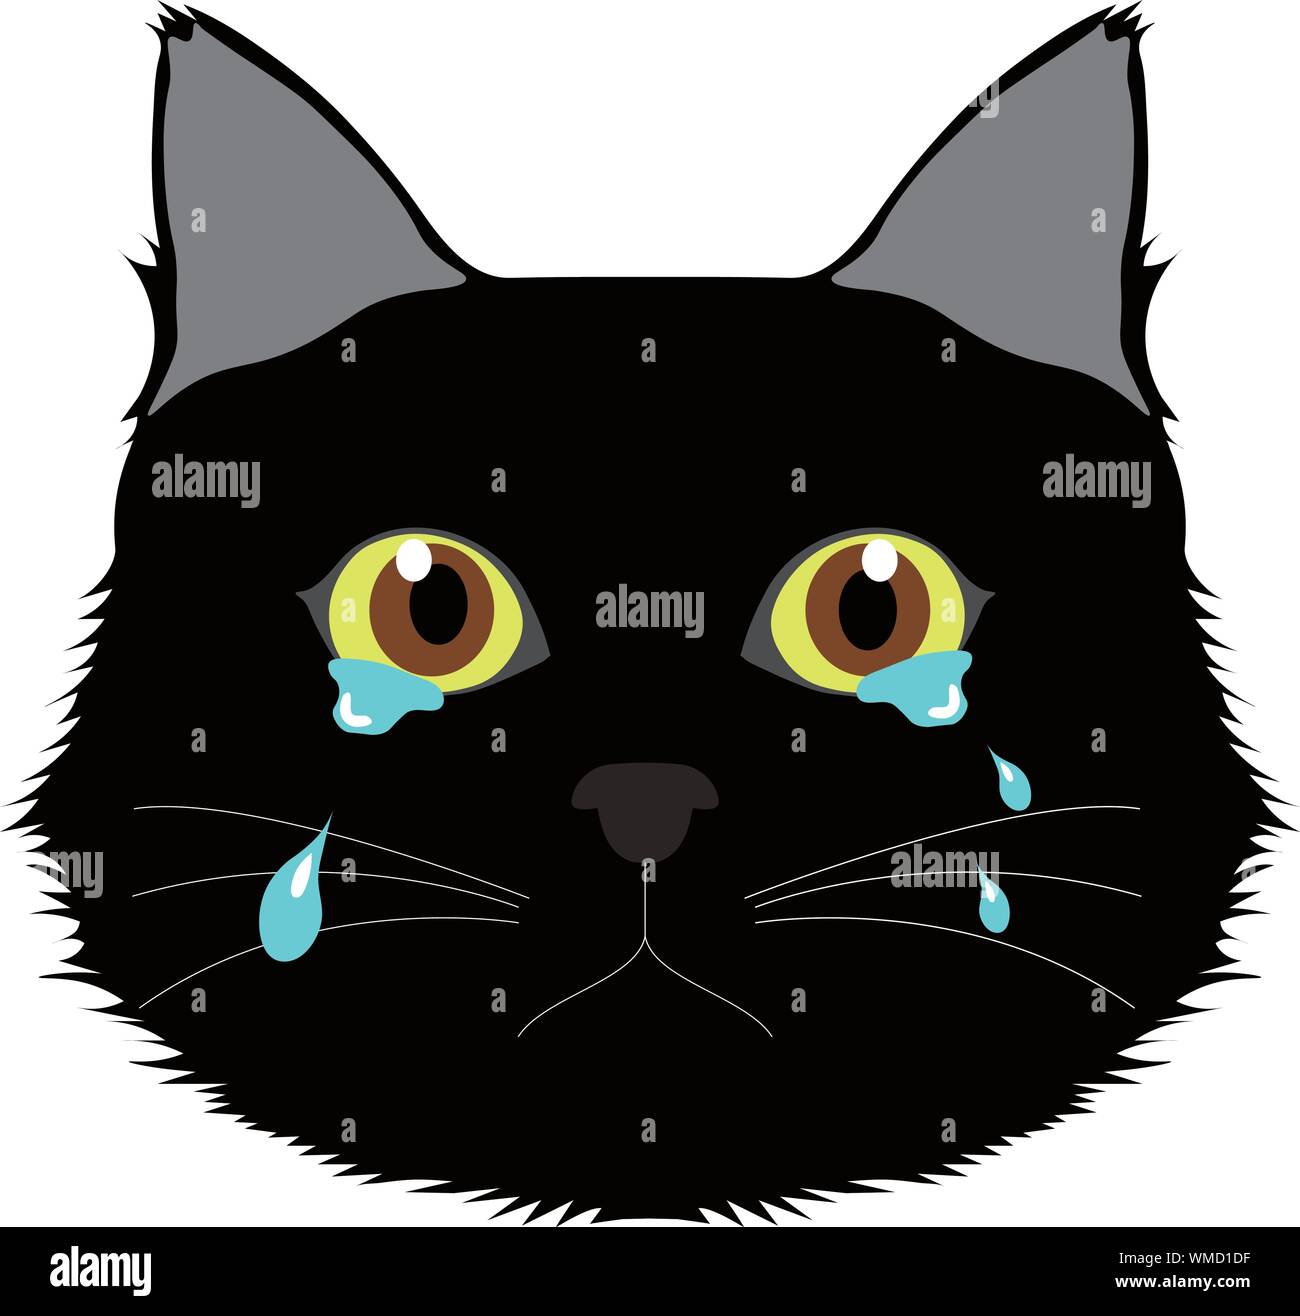 Illustration of a black cat  in tears in vectors Stock Photo